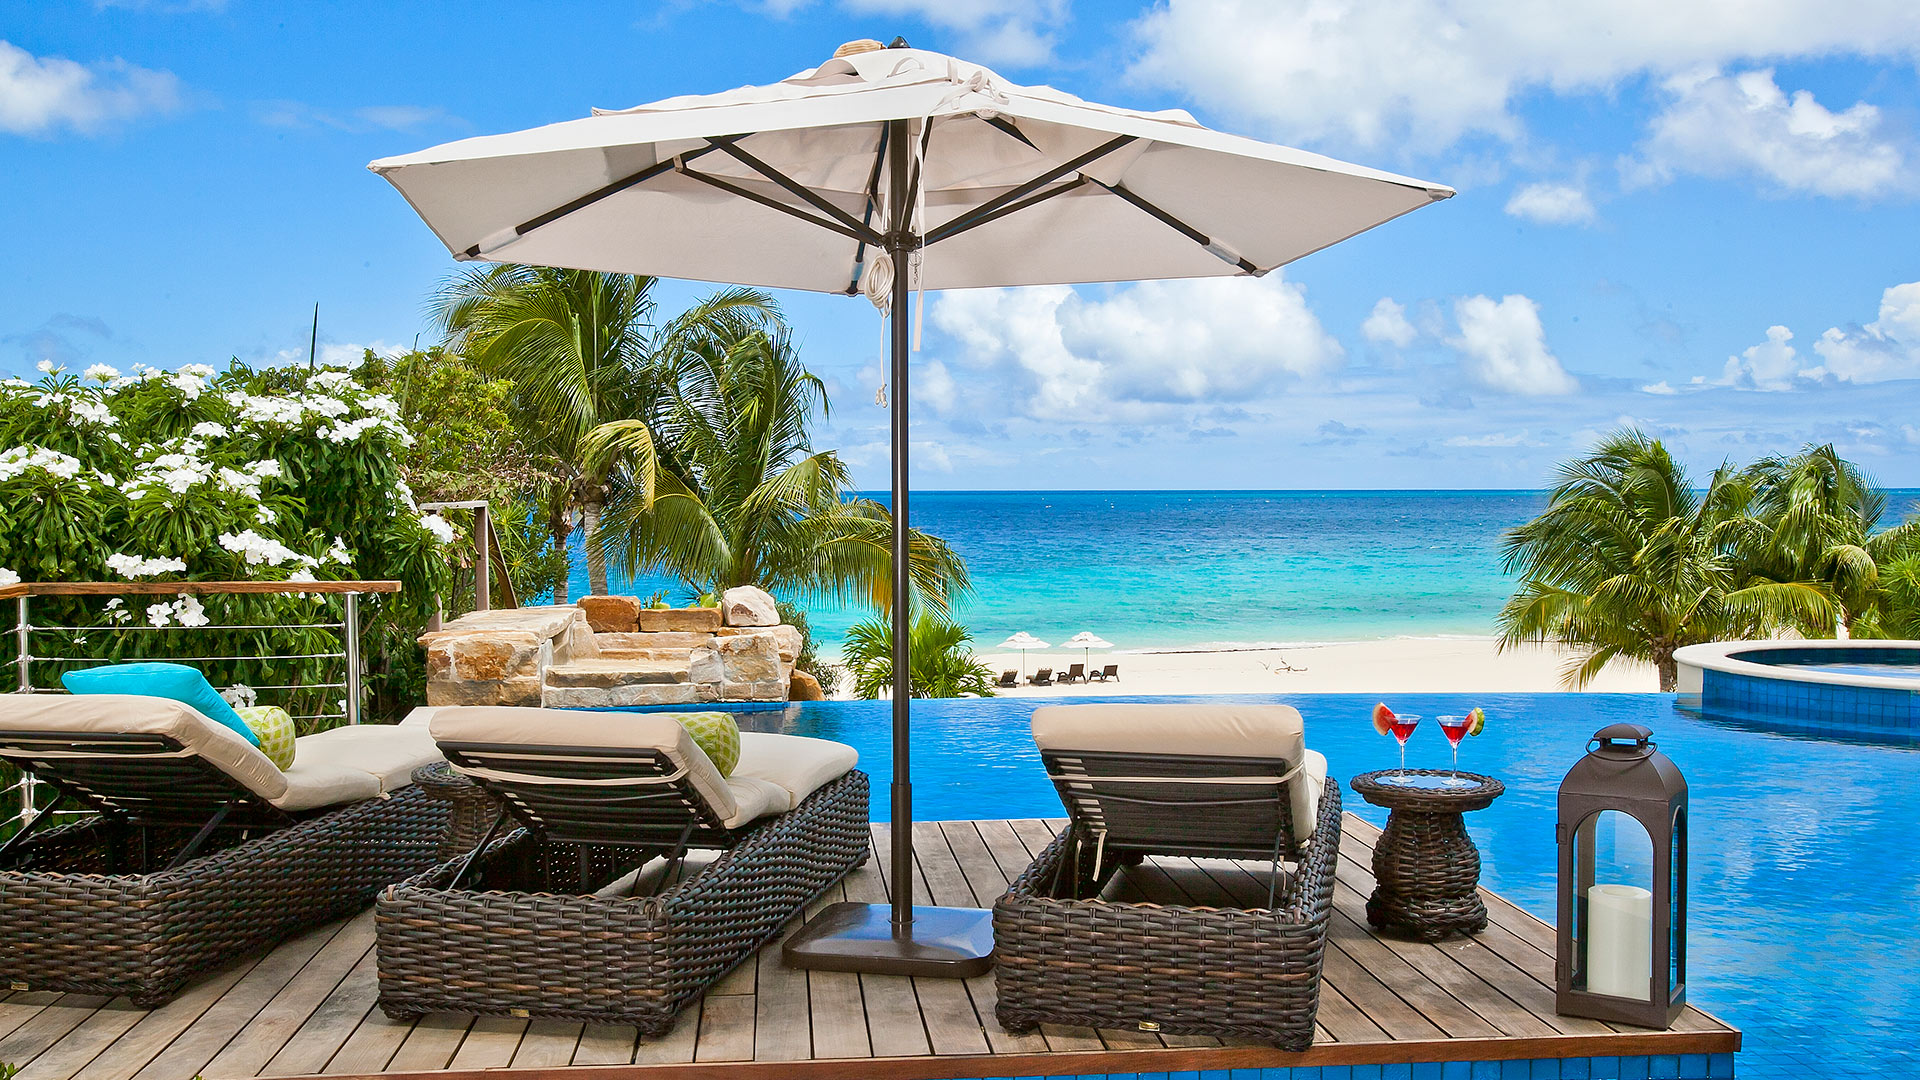 Take in the stunning views of the Caribbean Sea from the pool deck